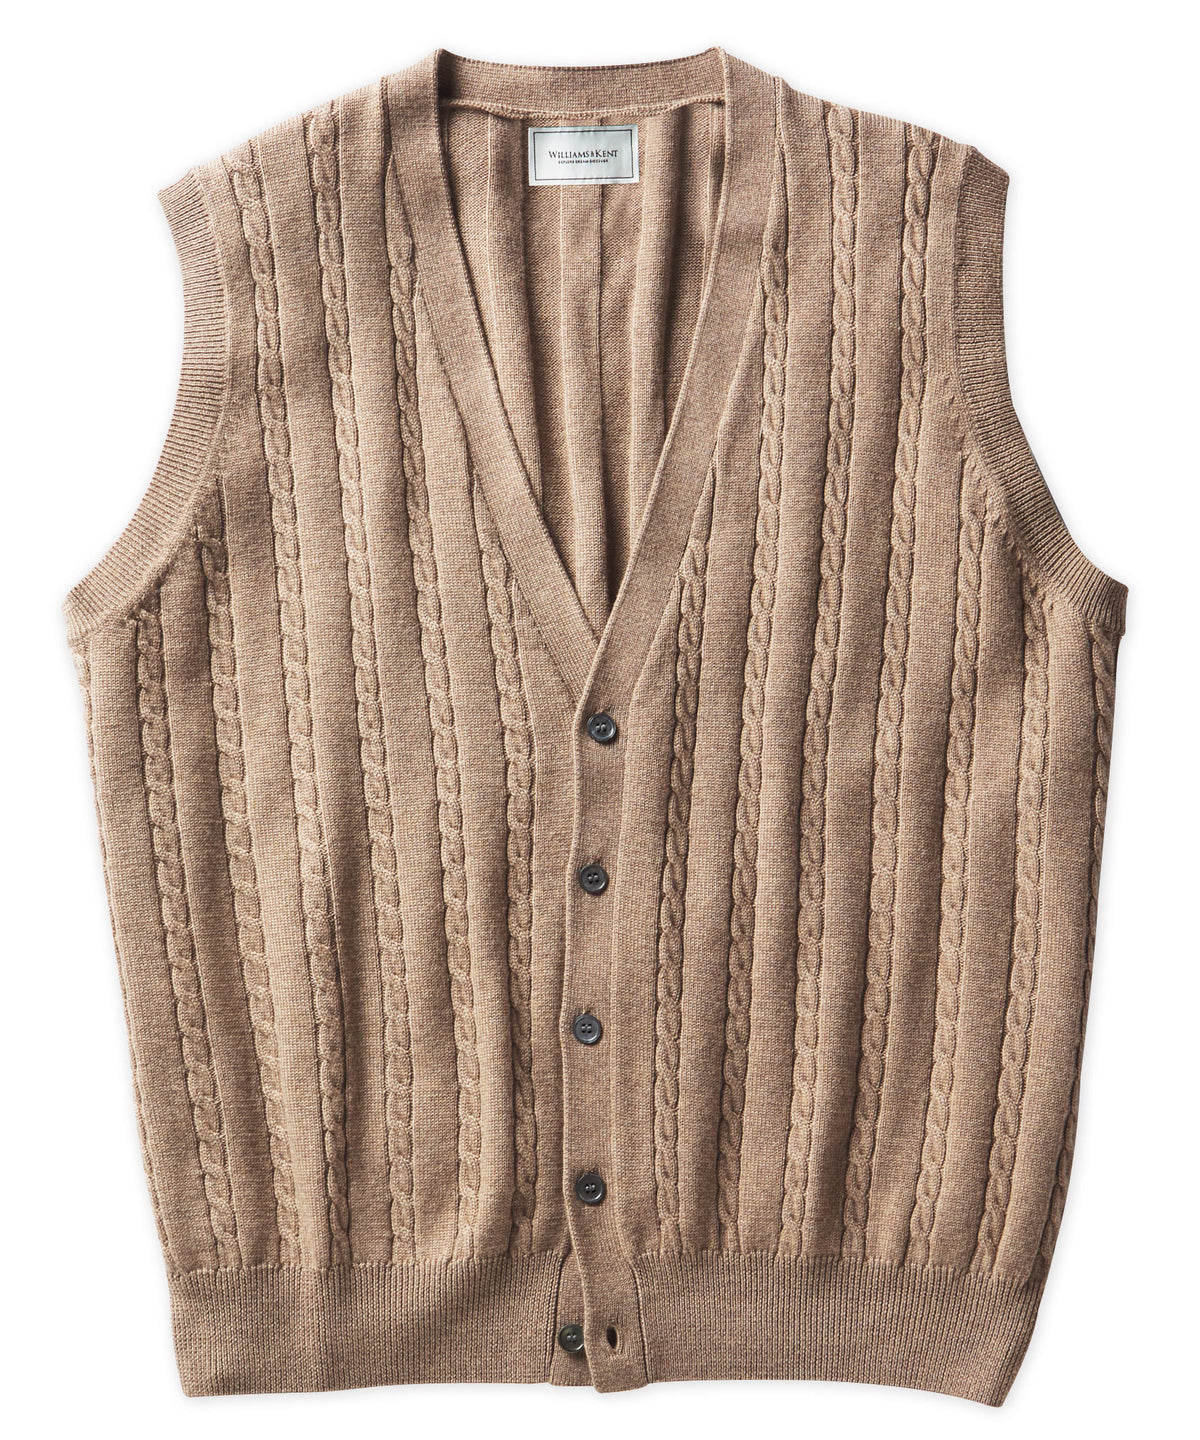 Italian Merino Wool Button-Front Cable Sweater Vest